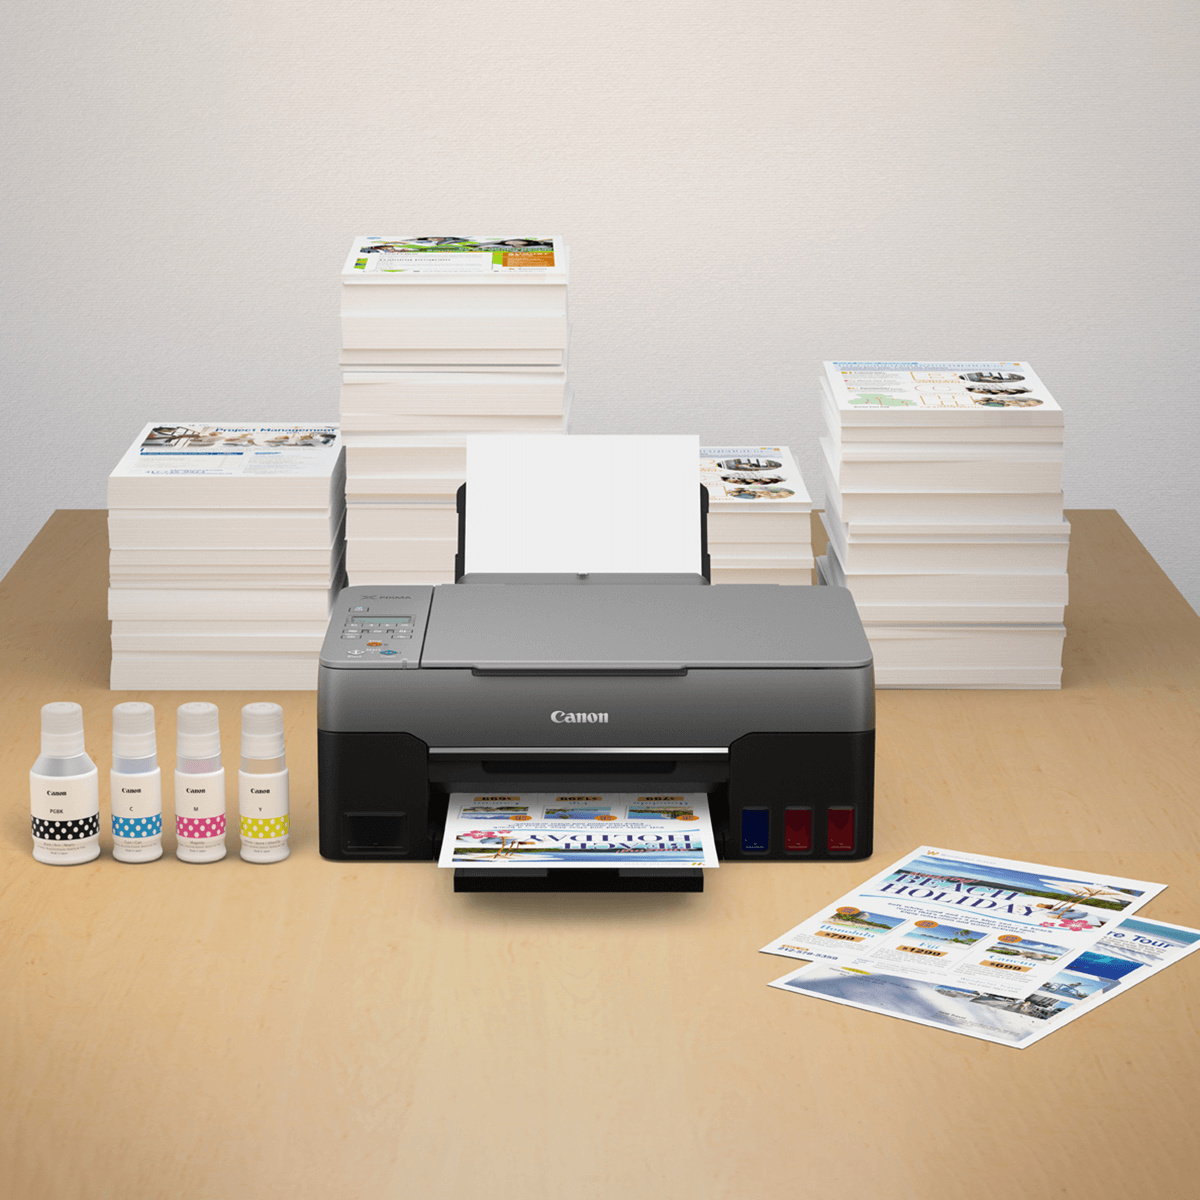 Continuous Ink Tank Printers and Why You Need One